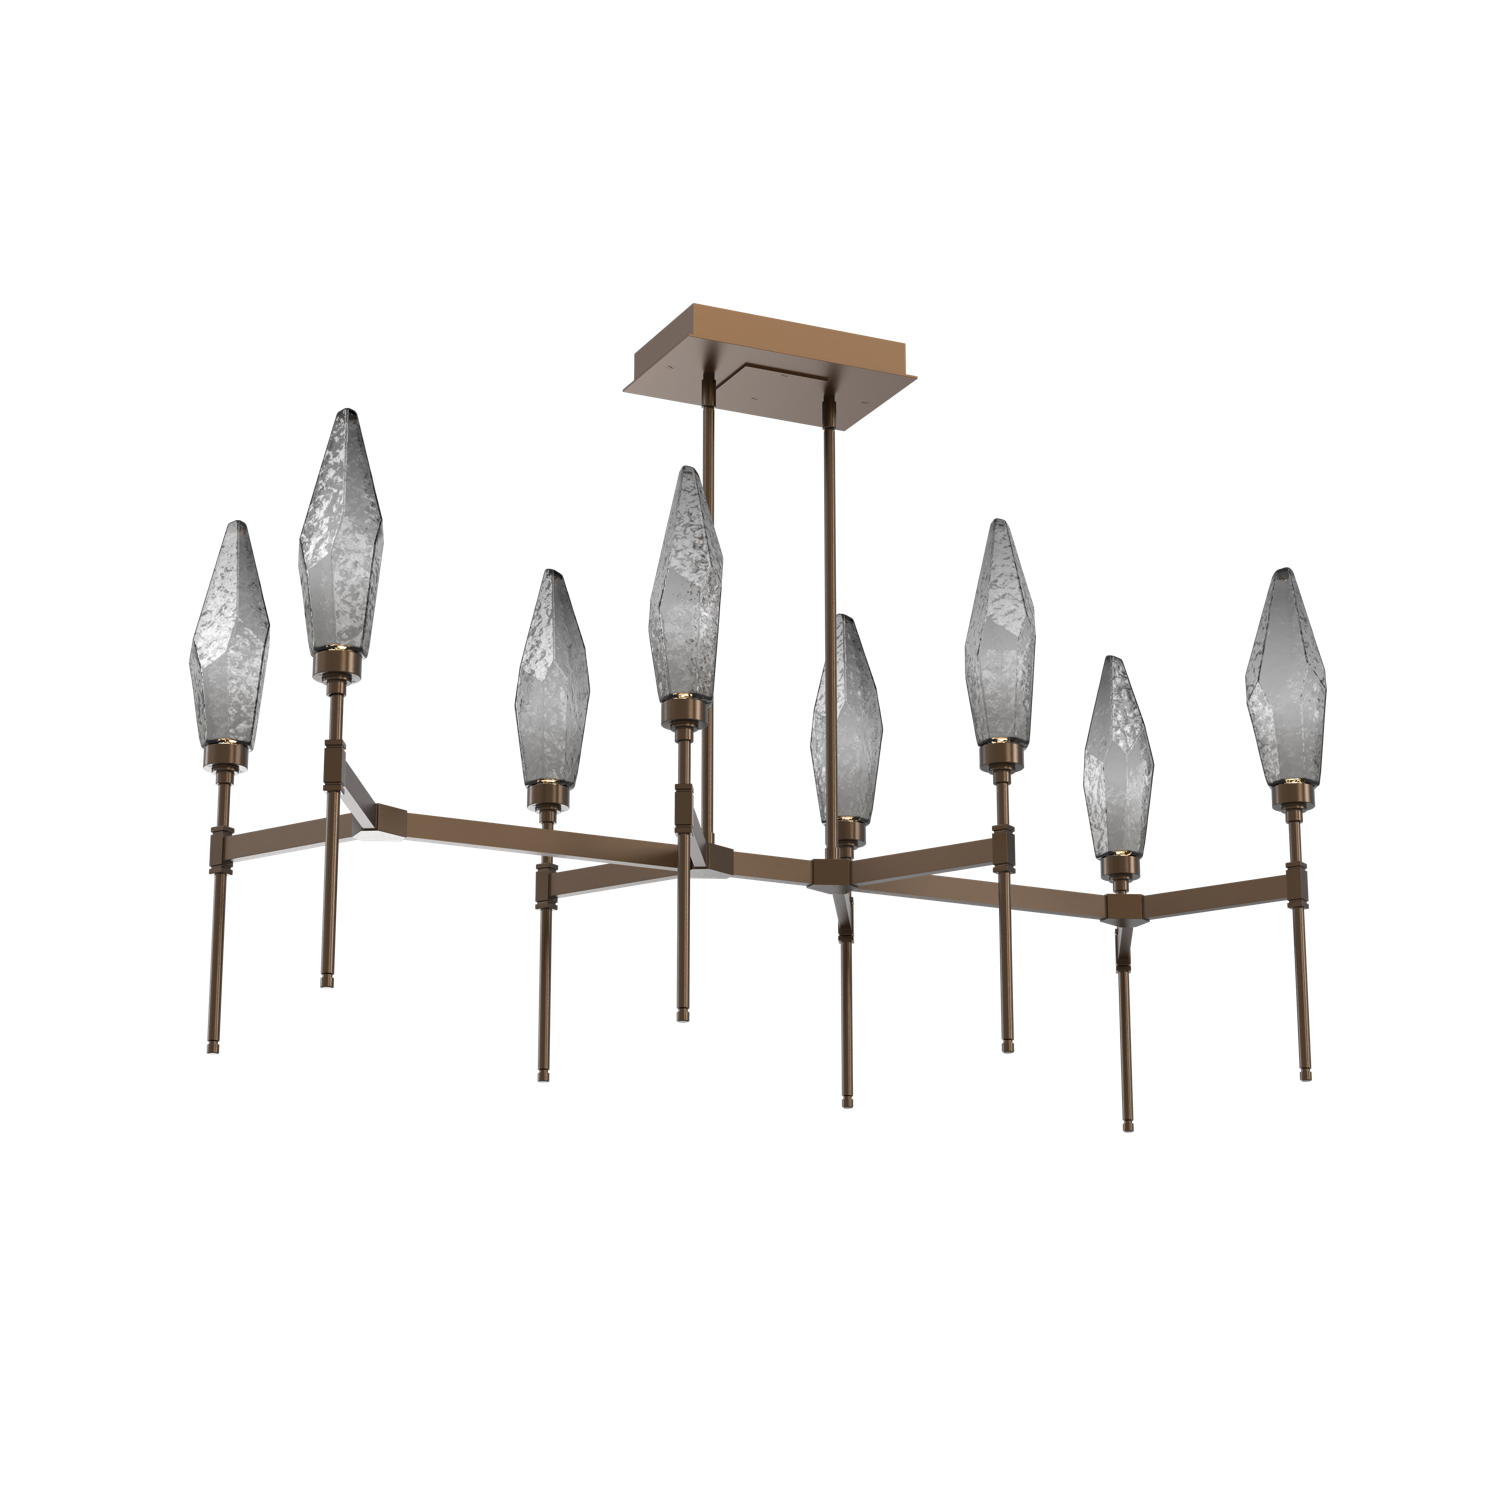 PLB0050-48-FB-CS-Hammerton-Studio-Rock-Crystal-48-inch-linear-belvedere-chandelier-with-flat-bronze-finish-and-chilled-smoke-glass-shades-and-LED-lamping